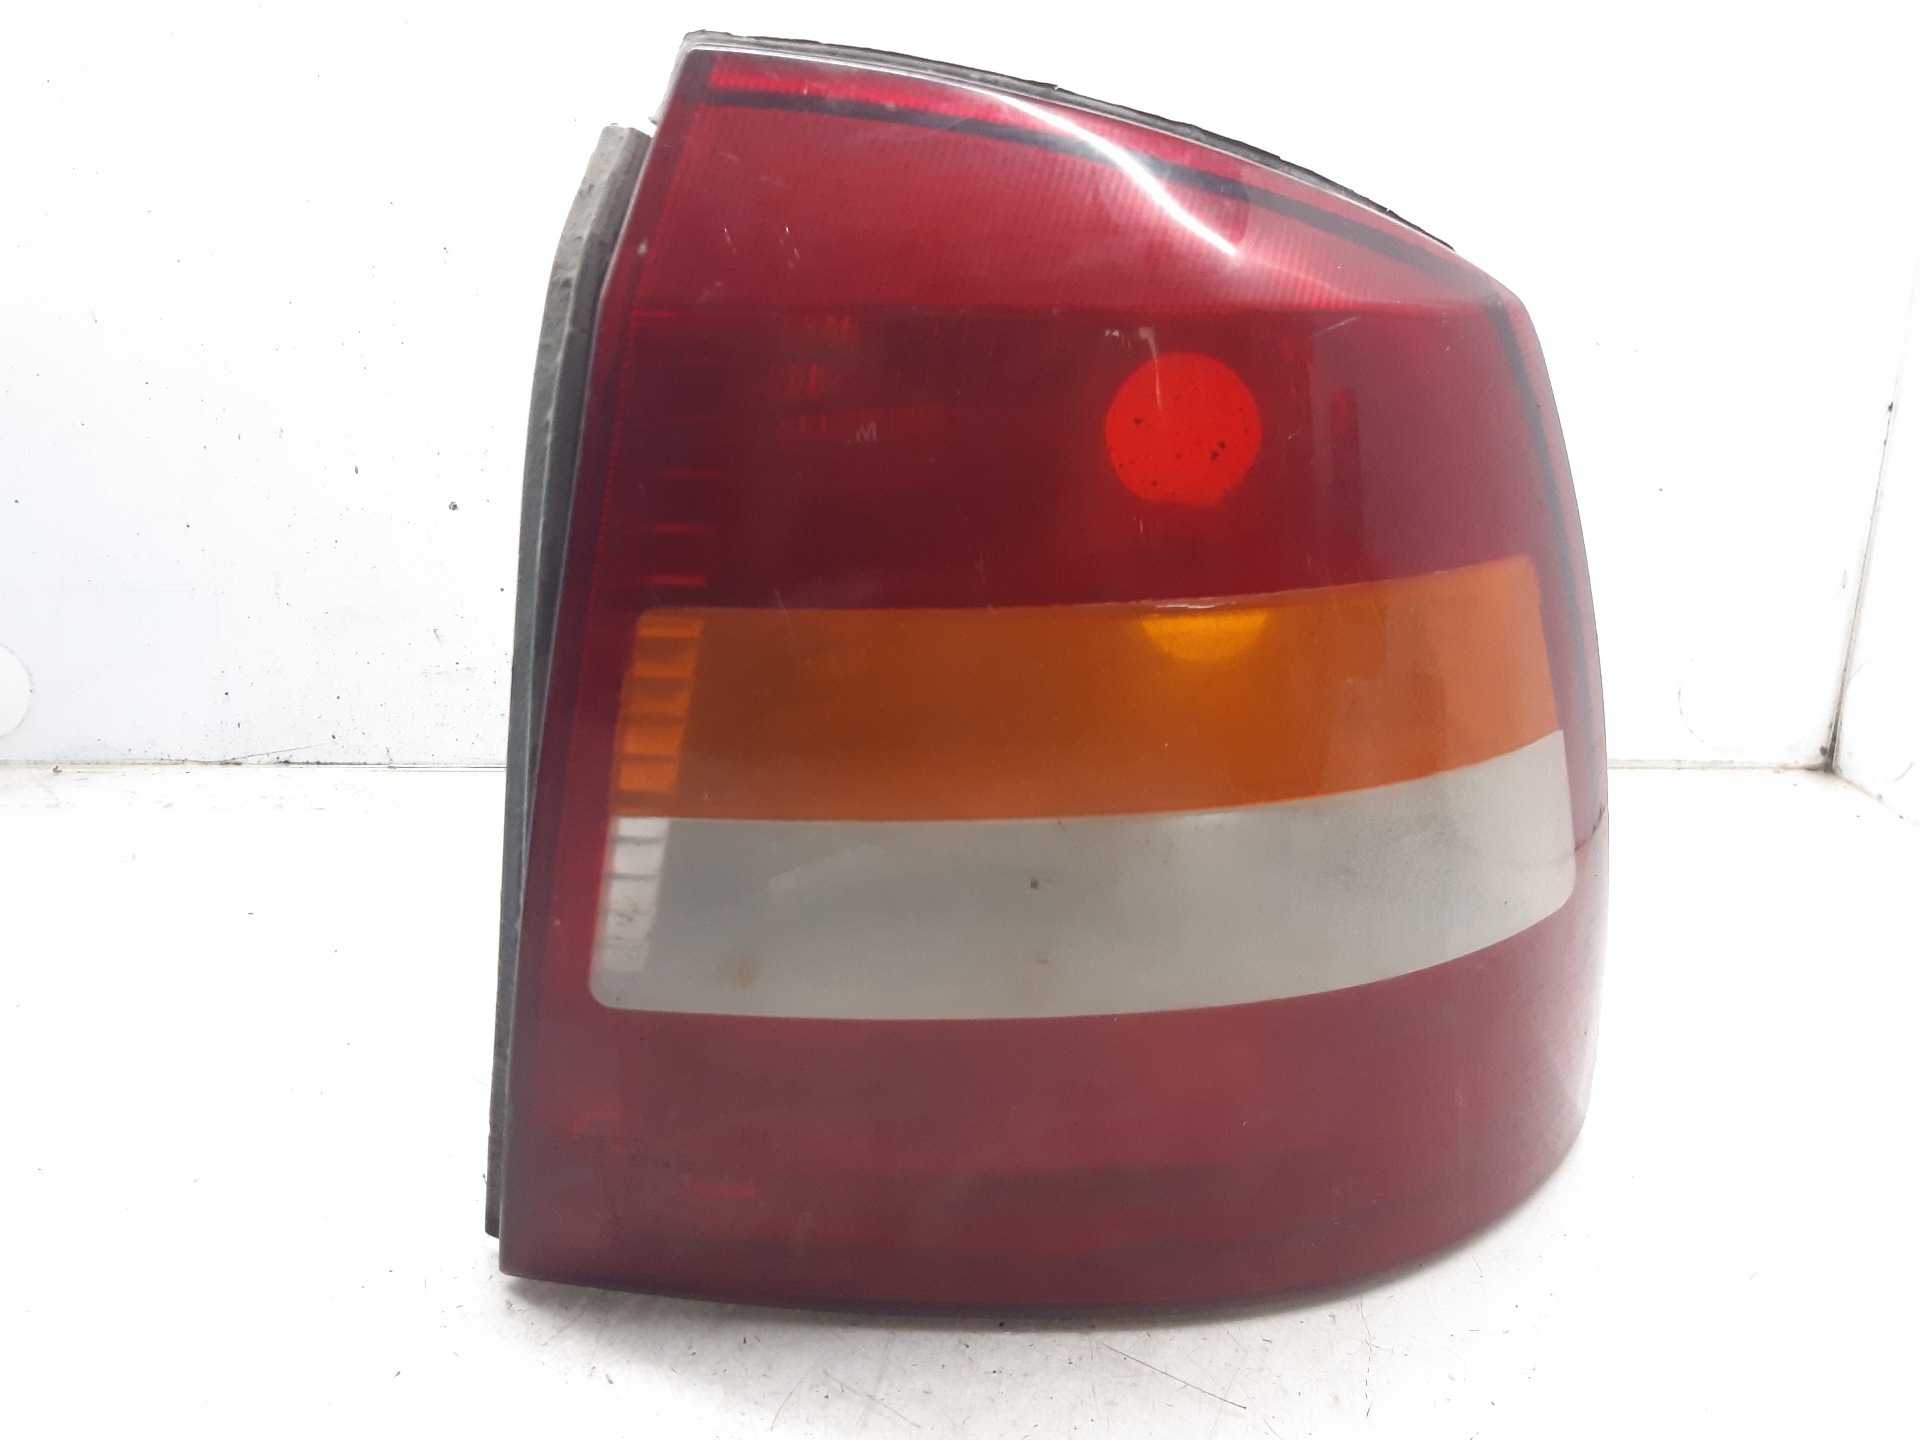 OPEL Astra H (2004-2014) Rear Right Taillight Lamp 13110934 24030447